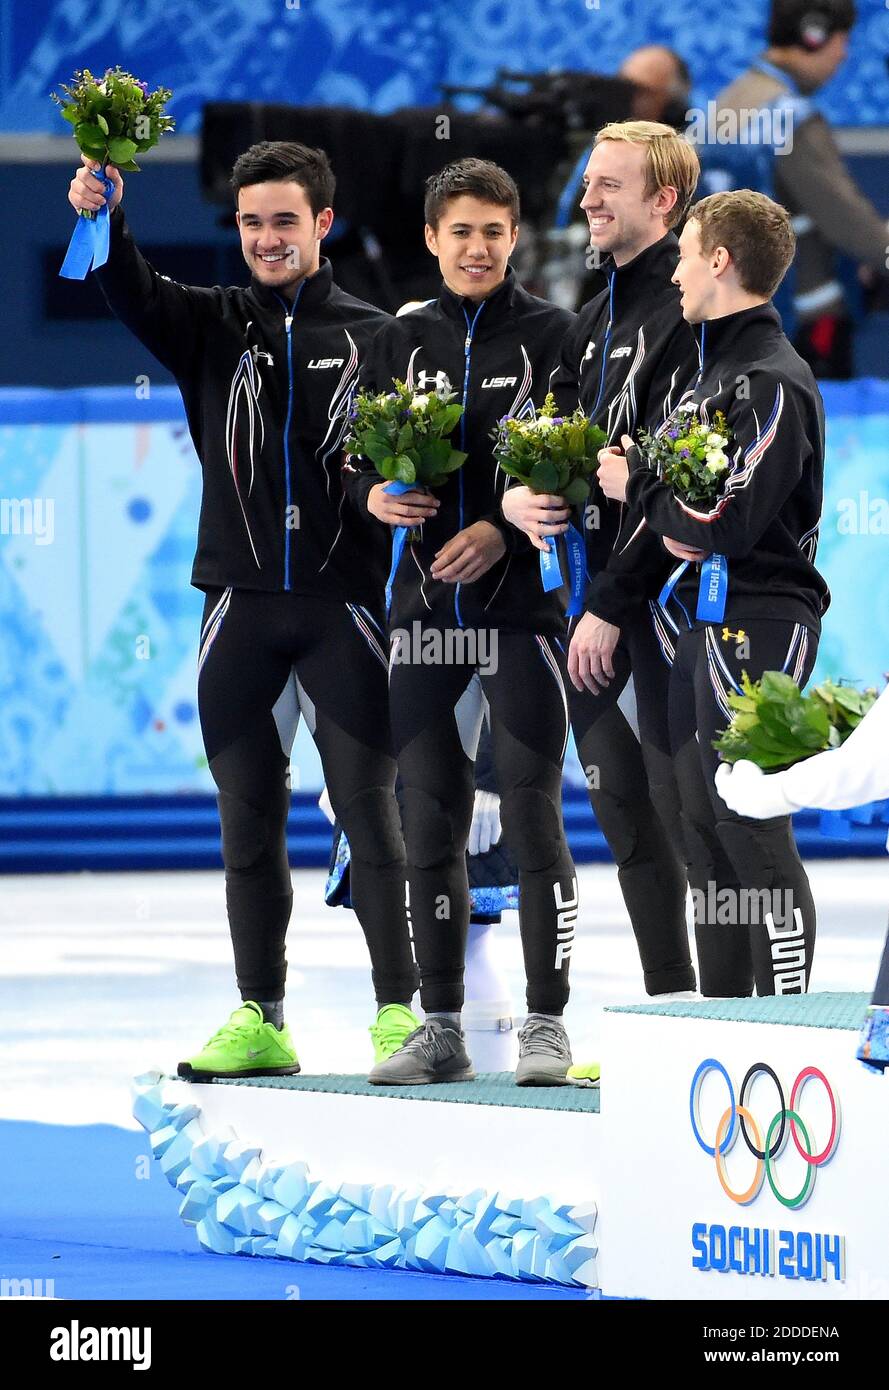 NO FILM, NO VIDEO, NO TV, NO DOCUMENTARY - USA Silver medalist (l-r) Eduardo Alvarez, J.R. Celski, Chris Creveling and Jordan Malone celebrate on the podium their 2nd place finish in the men's 5000 meter relay speed skating race at the Iceberg Skating Palace during the Winter Olympics in Sochi, Russia, Friday, February 21, 2014. Photo by Harry E. Walker/MCT/ABACAPRESS.COM Stock Photo